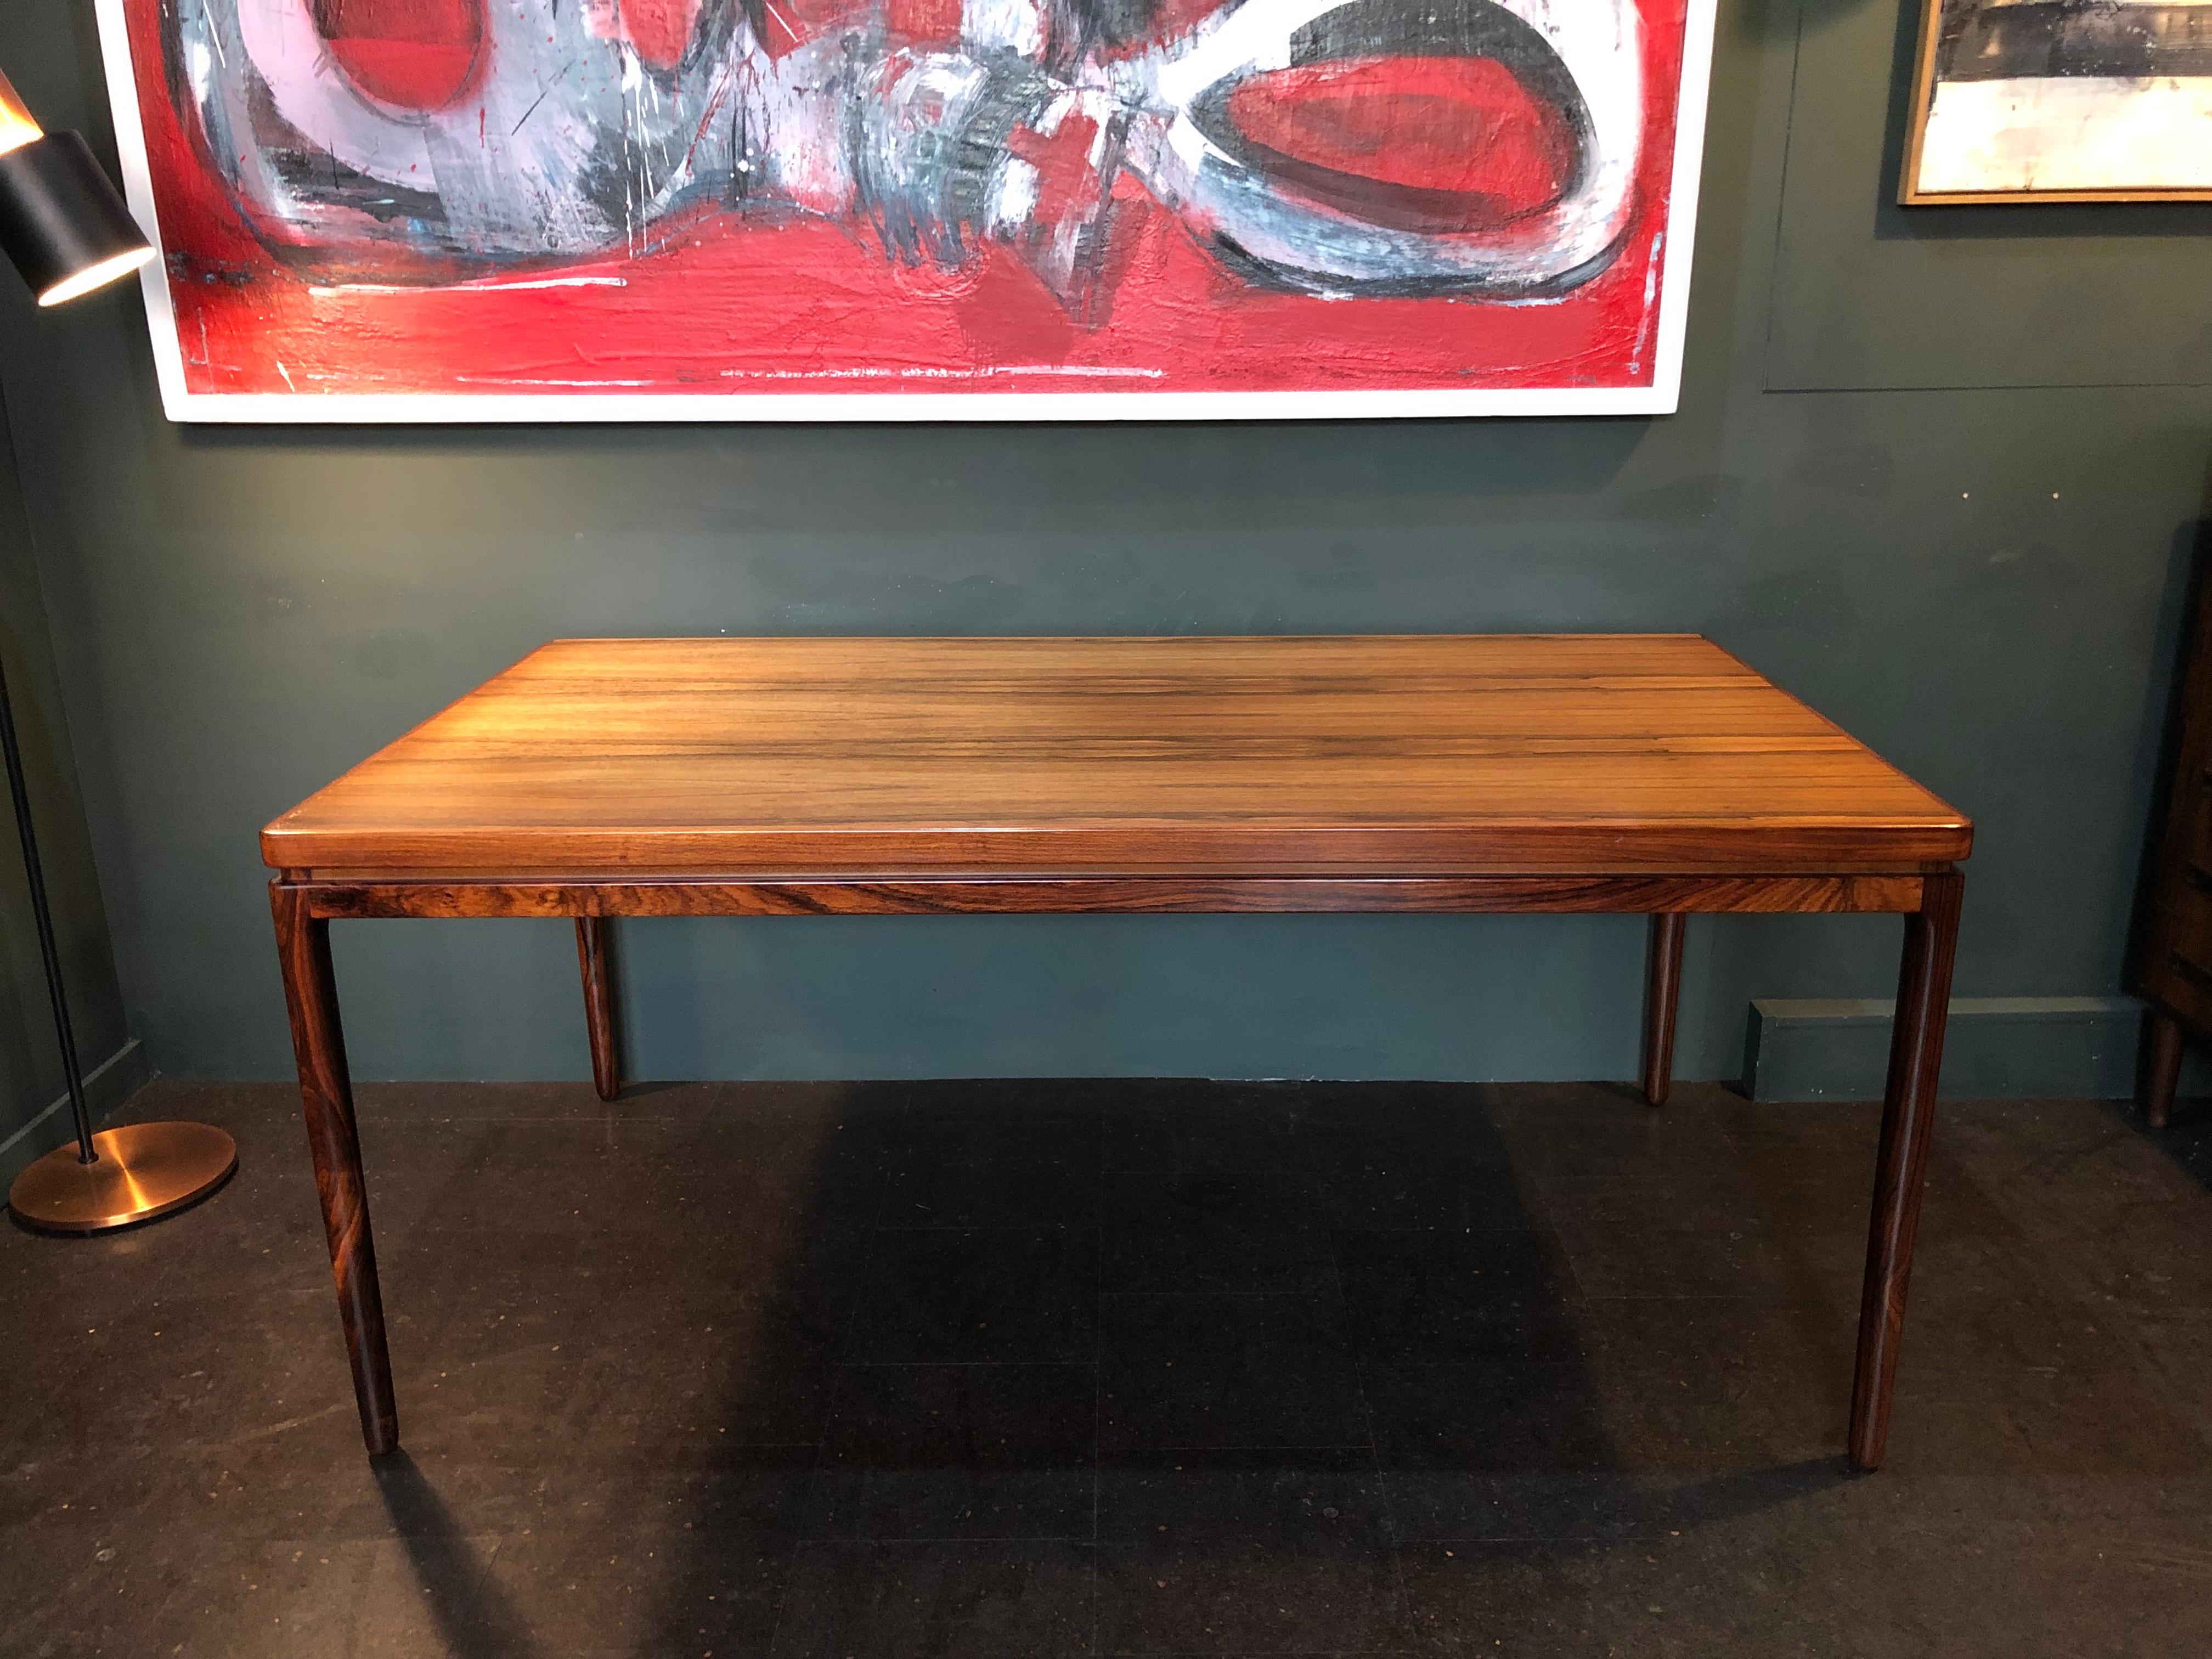 20th Century Large Midcentury Danish Rosewood Dining Table by Johannes Andersen